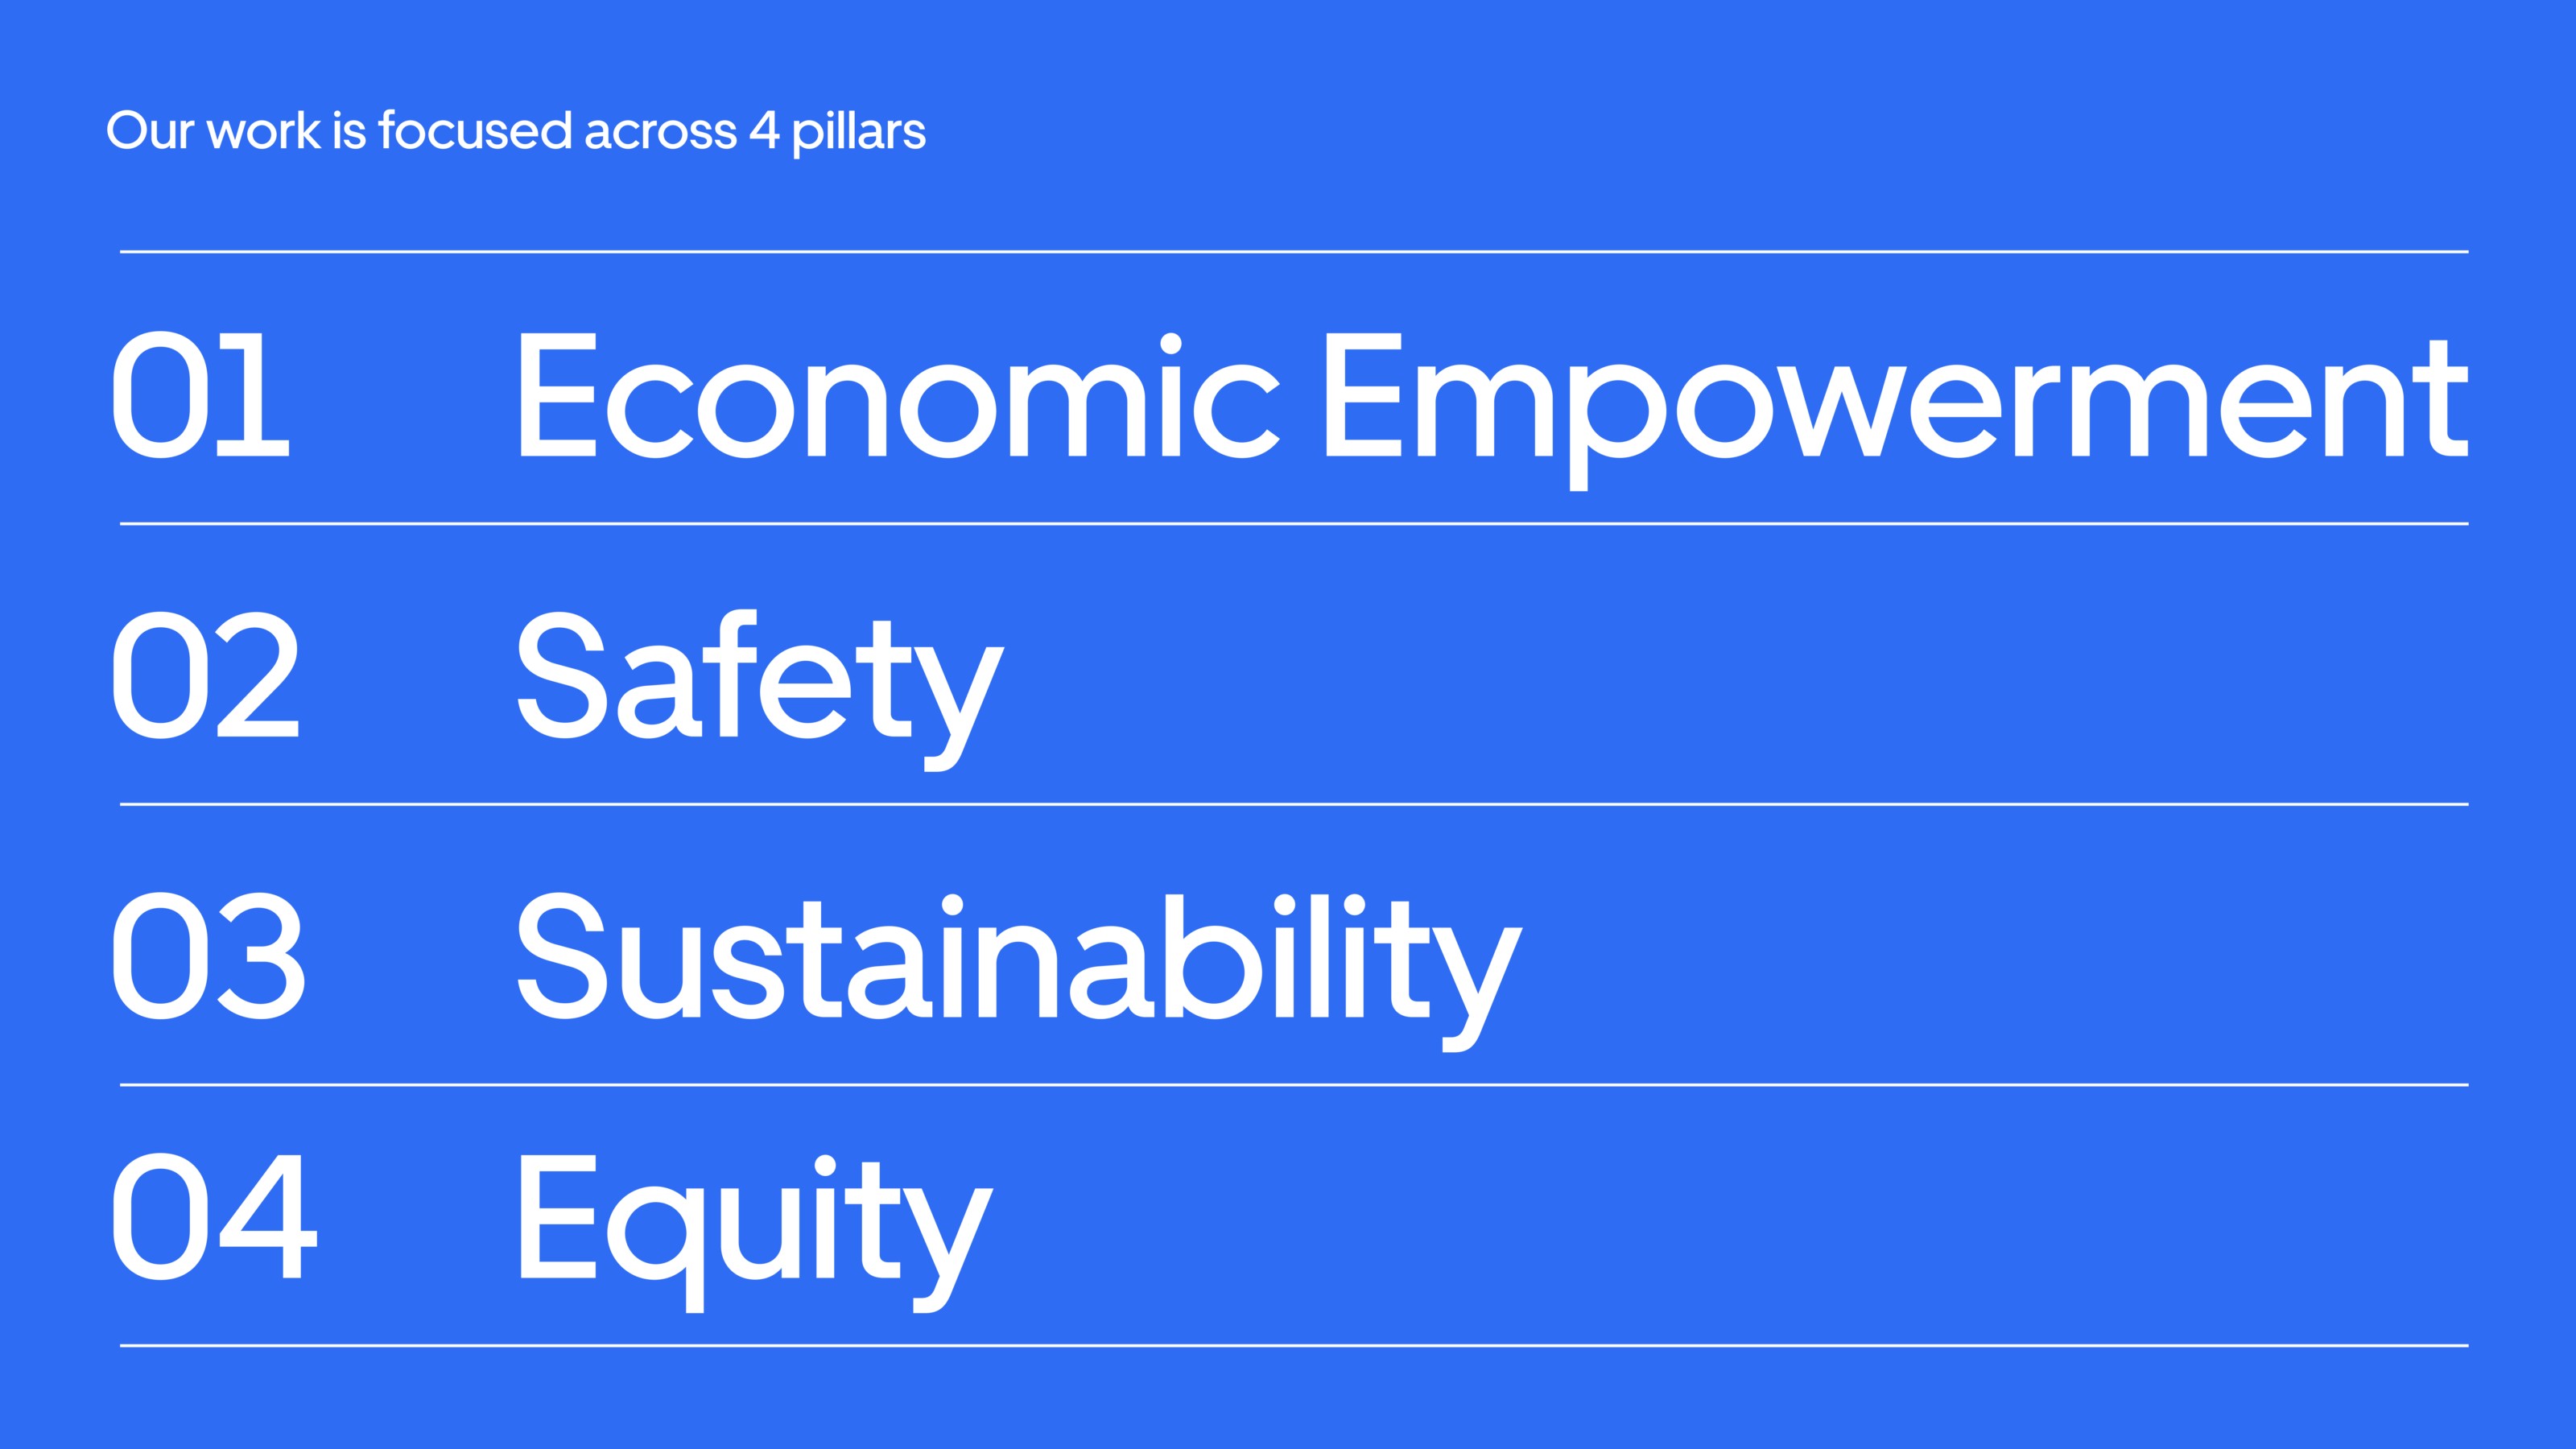 Our work is focused across 4 pillars: 01 Economic Empowerment; 02 Safety; 03 Sustainability; 04 Equity